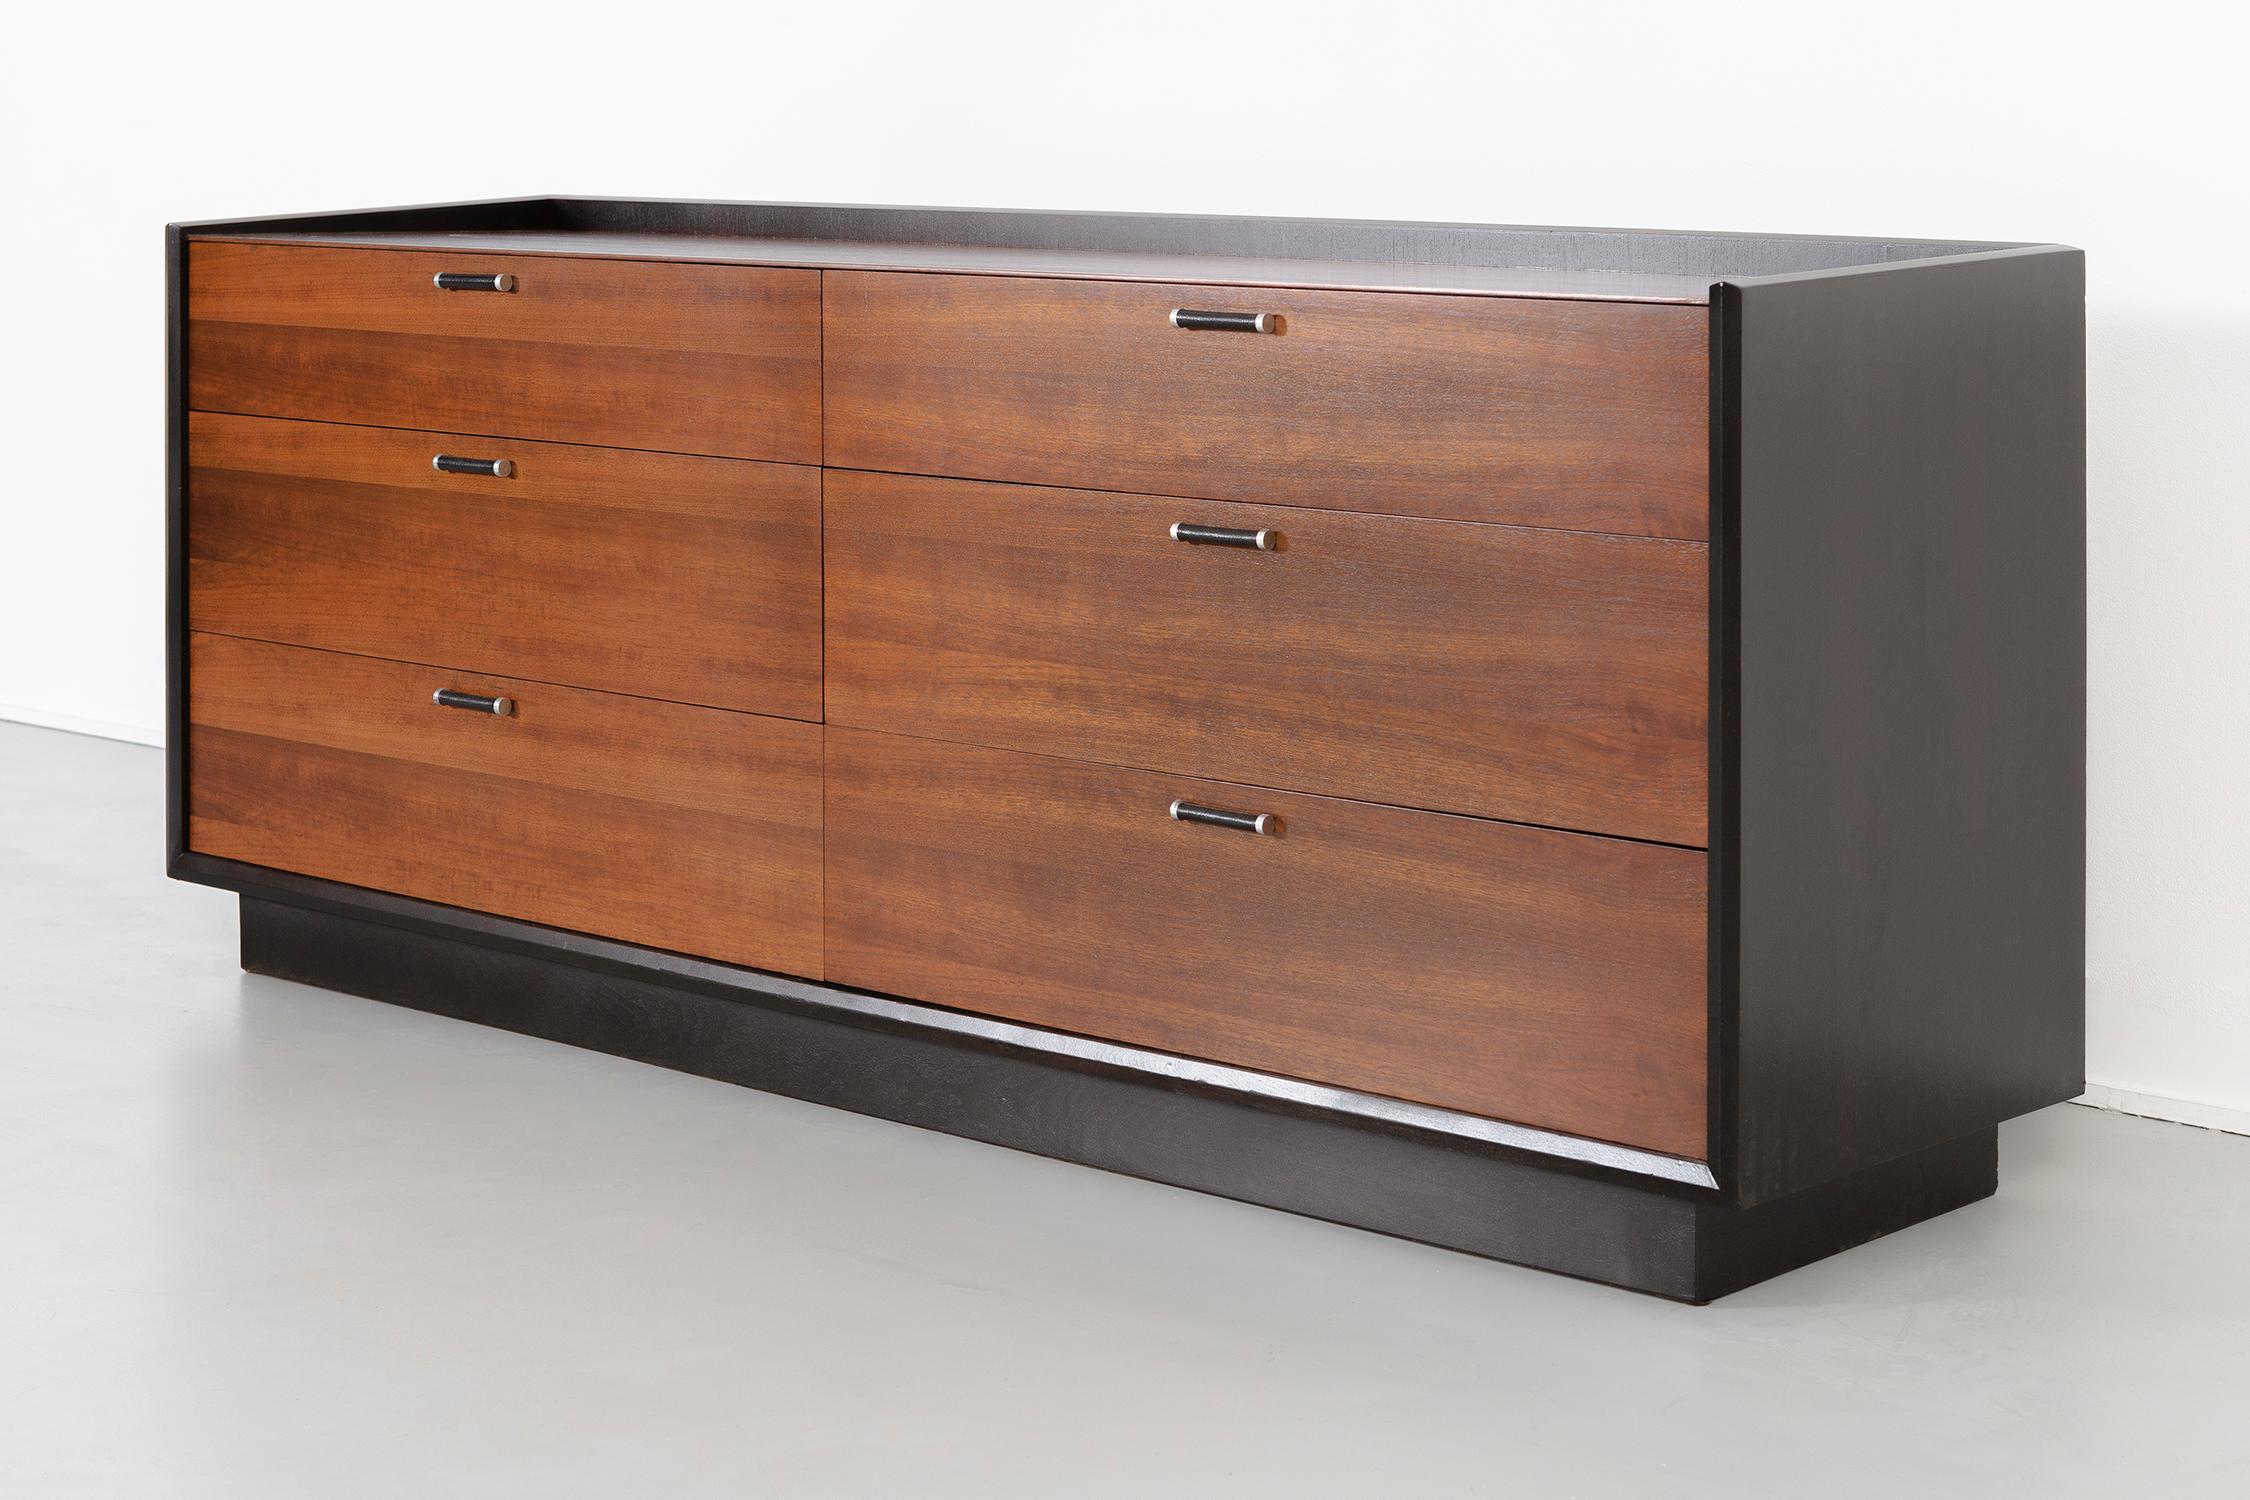 Credenza

designed by Milo Baughman for Glenn of California

USA, circa 1960s

Walnut with leather and aluminum pulls

Measures: 29 ¾” H x 72” W x 20 ?” D.